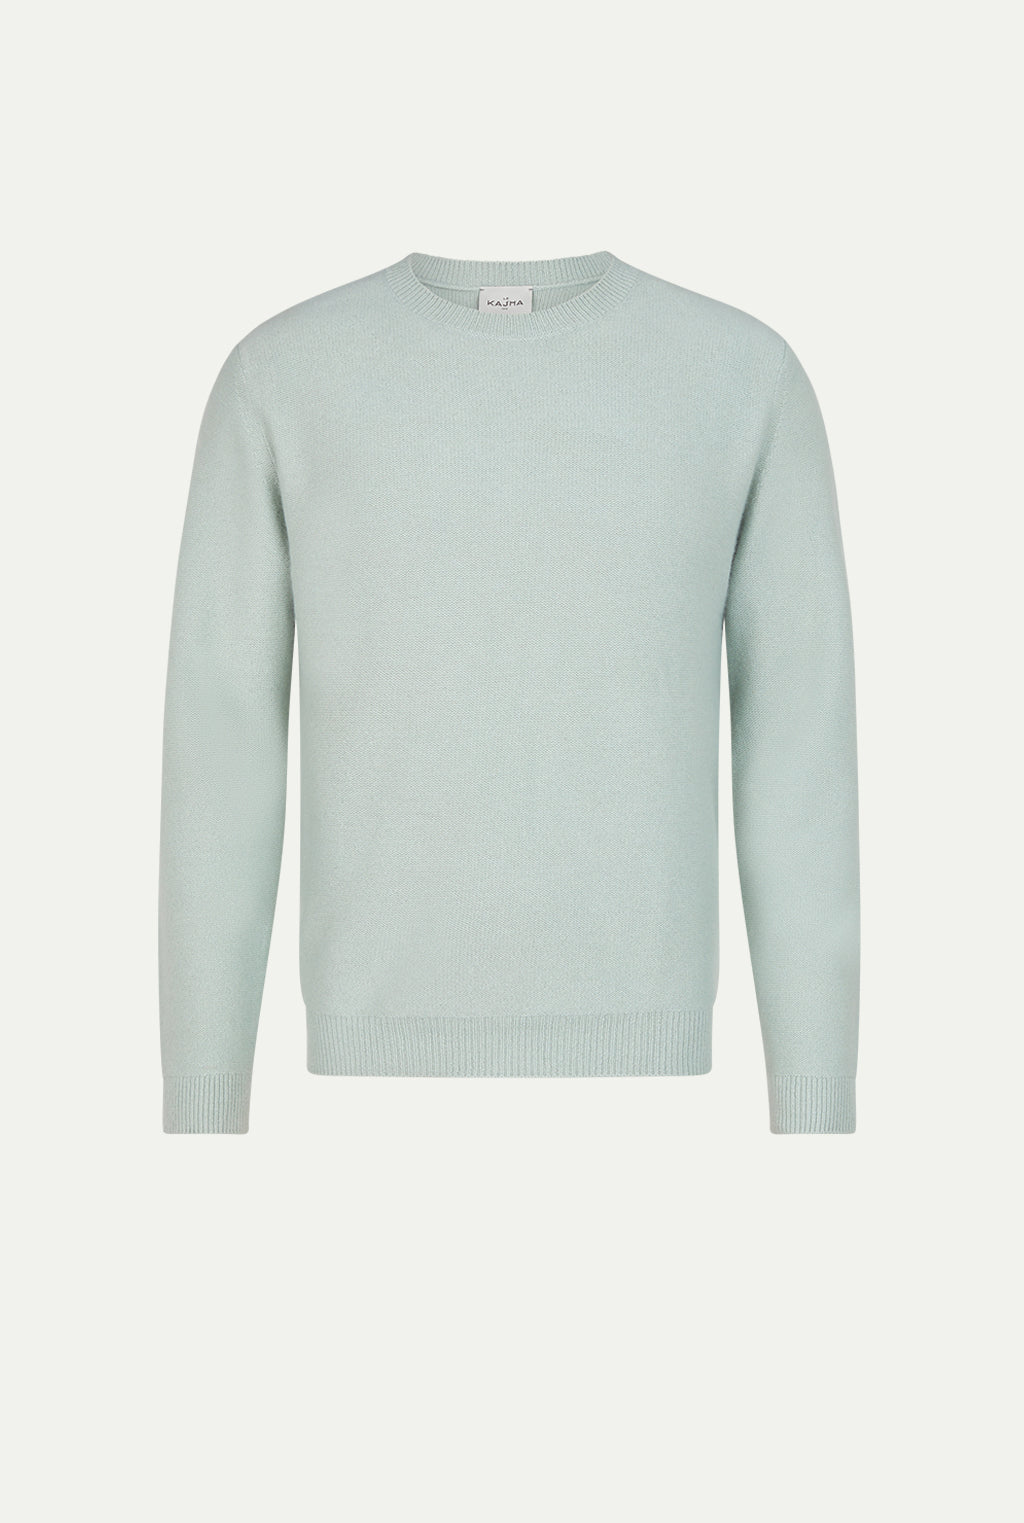 TOUCQUES cashmere sweater